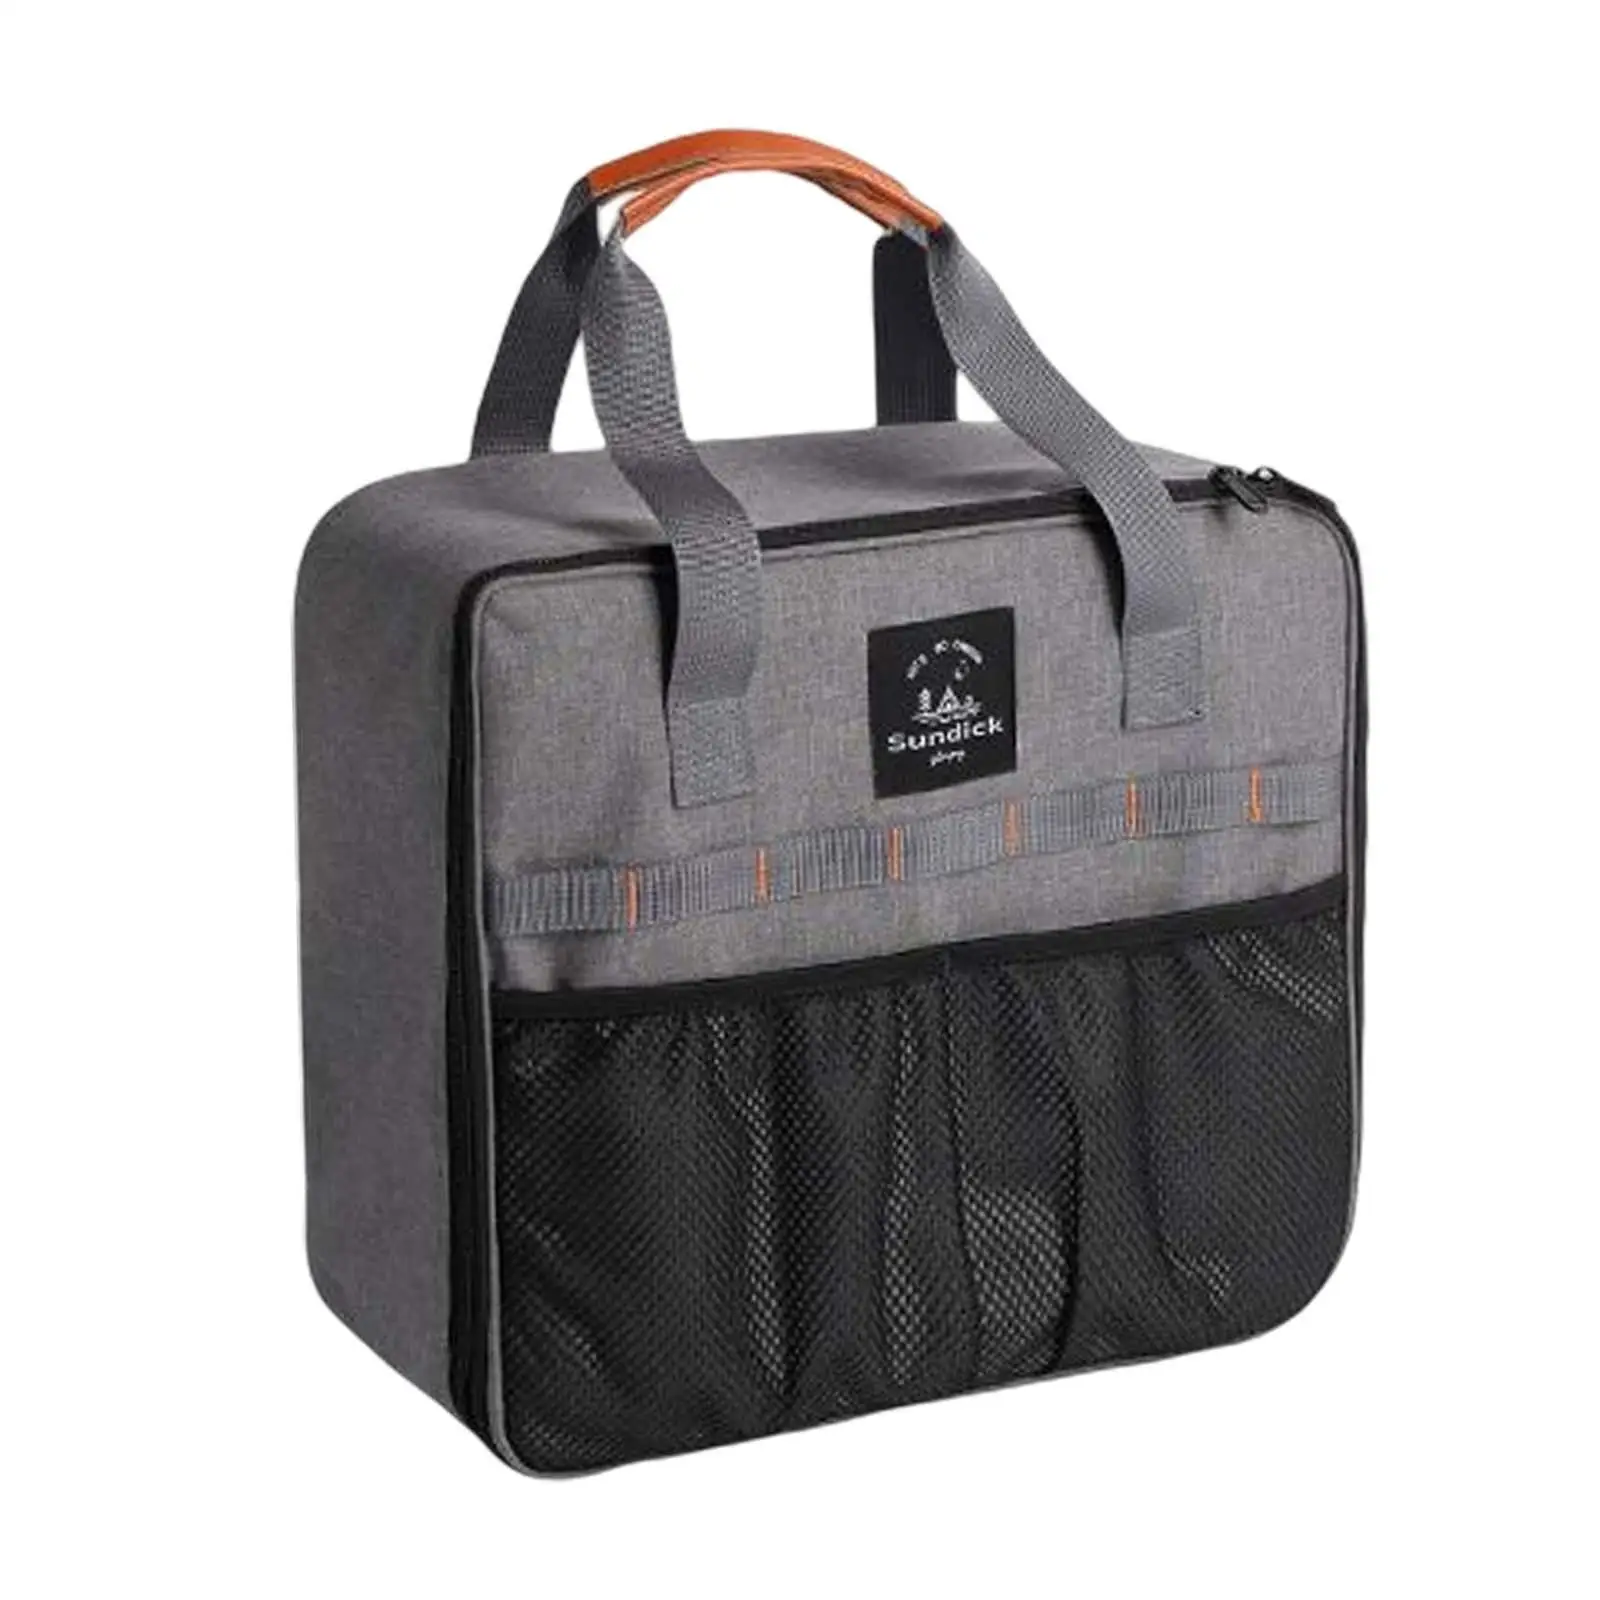 Camp Carry Case Gas Tank Storage Bag for BBQ Tailgating Picnic